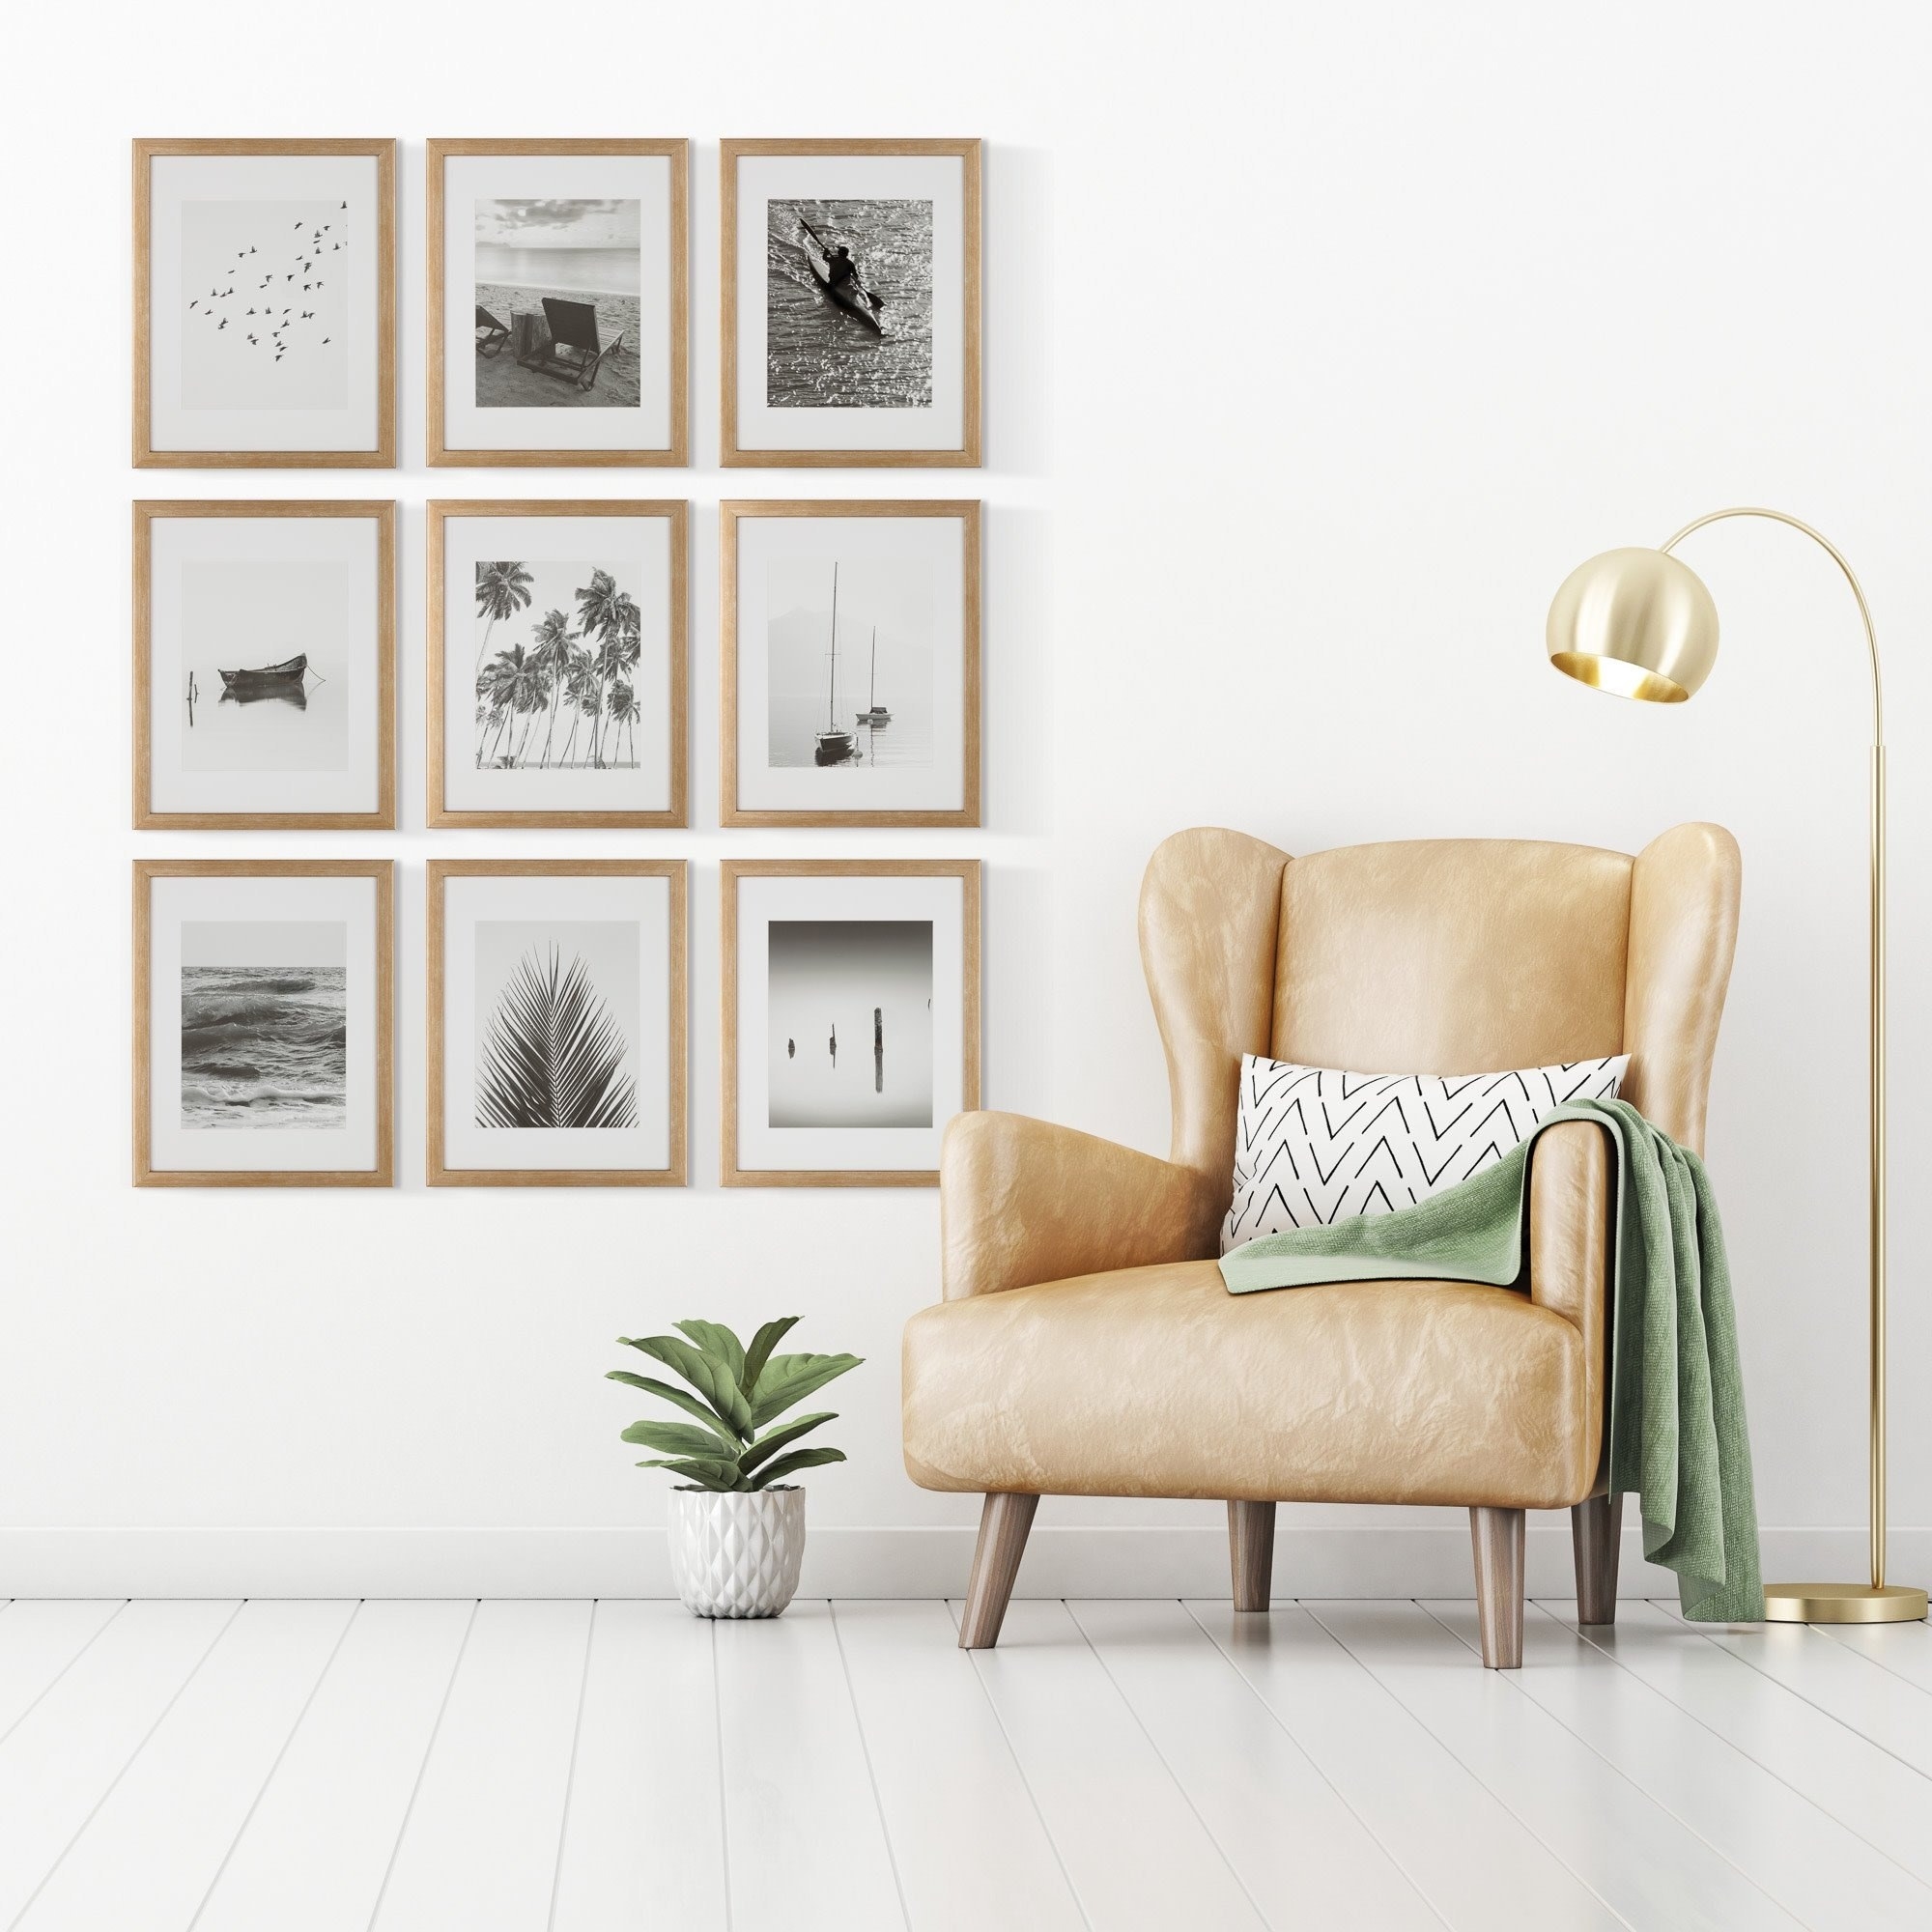 gold-tone black-and-white photos arranged in a gallery wall